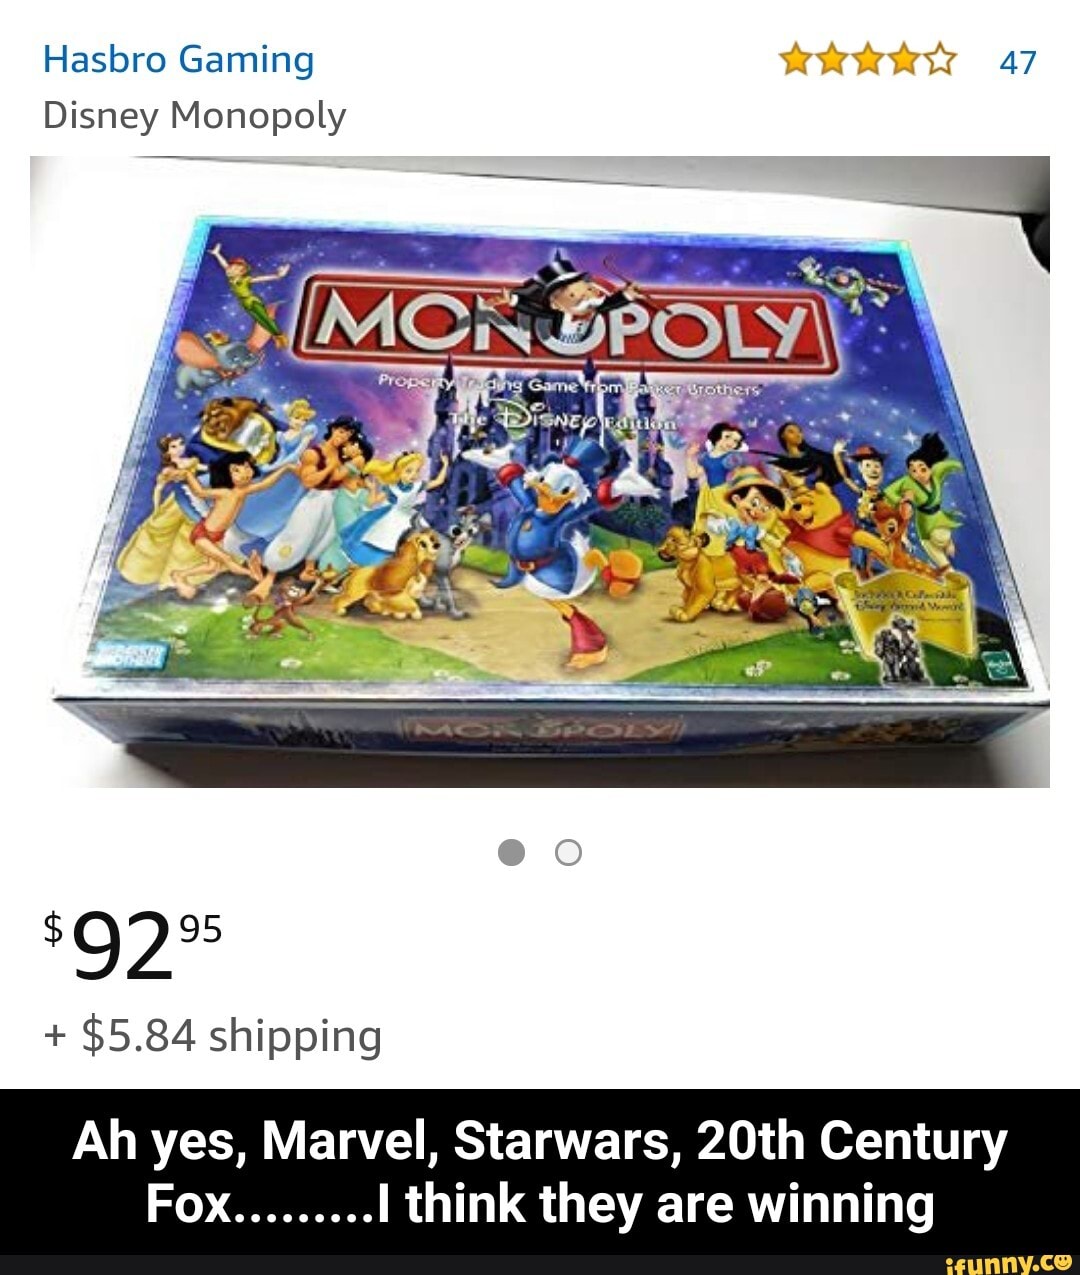 Hasbro Gaming EY Disney Monopoly Ah yes, Marvel, Starwars, 20th Century Fox  I think they are winning - Ah yes, Marvel, Starwars, 20th Century  FoxI think they are winning - iFunny Brazil